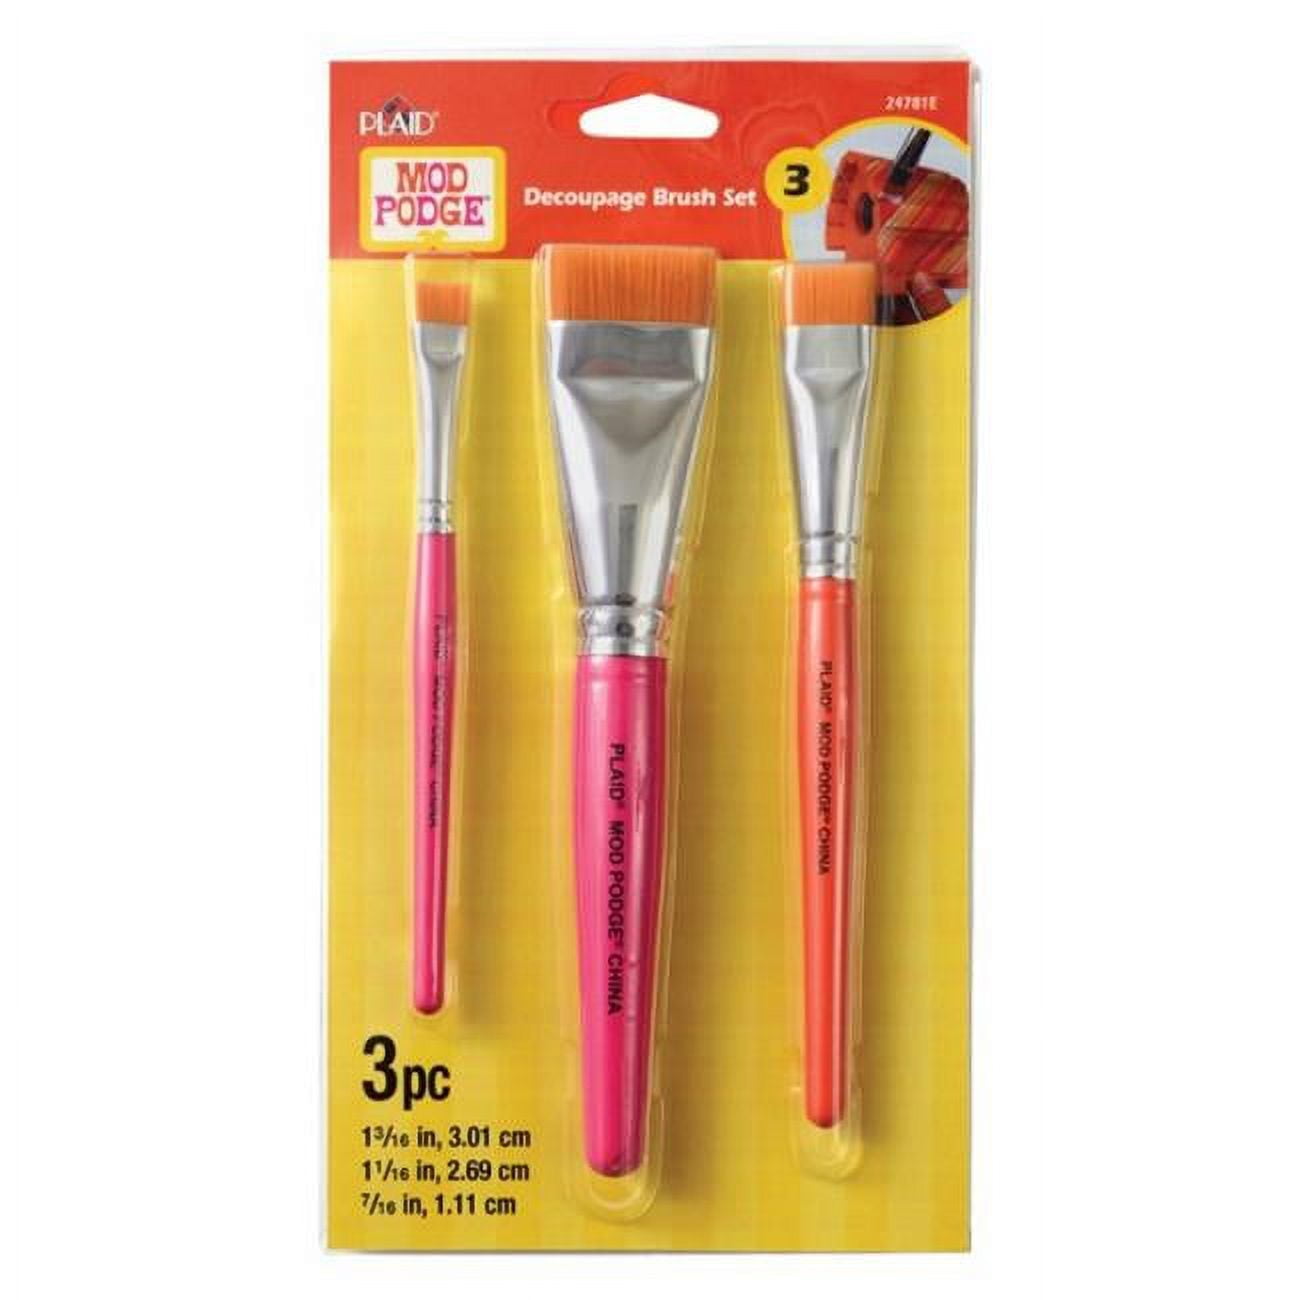 Mod Podge Decoupage Starter Kit, Gloss and Matte Medium with 3 Pixiss Foam  Brushes, Waterproof for Puzzles, Wood and More